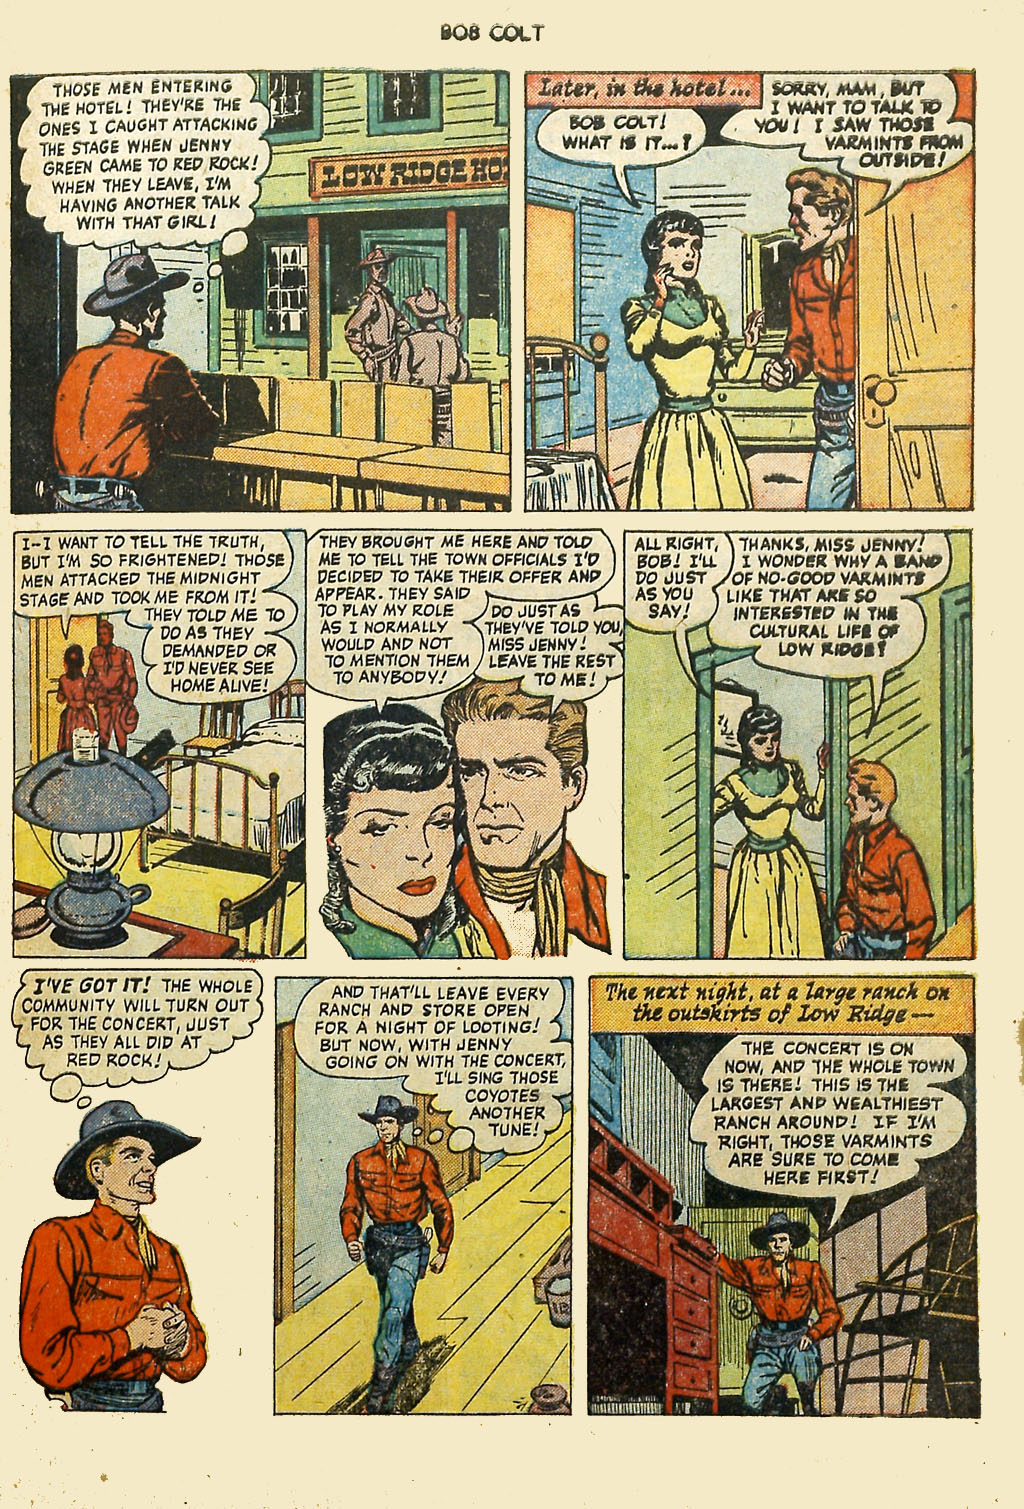 Read online Bob Colt Western comic -  Issue #2 - 33